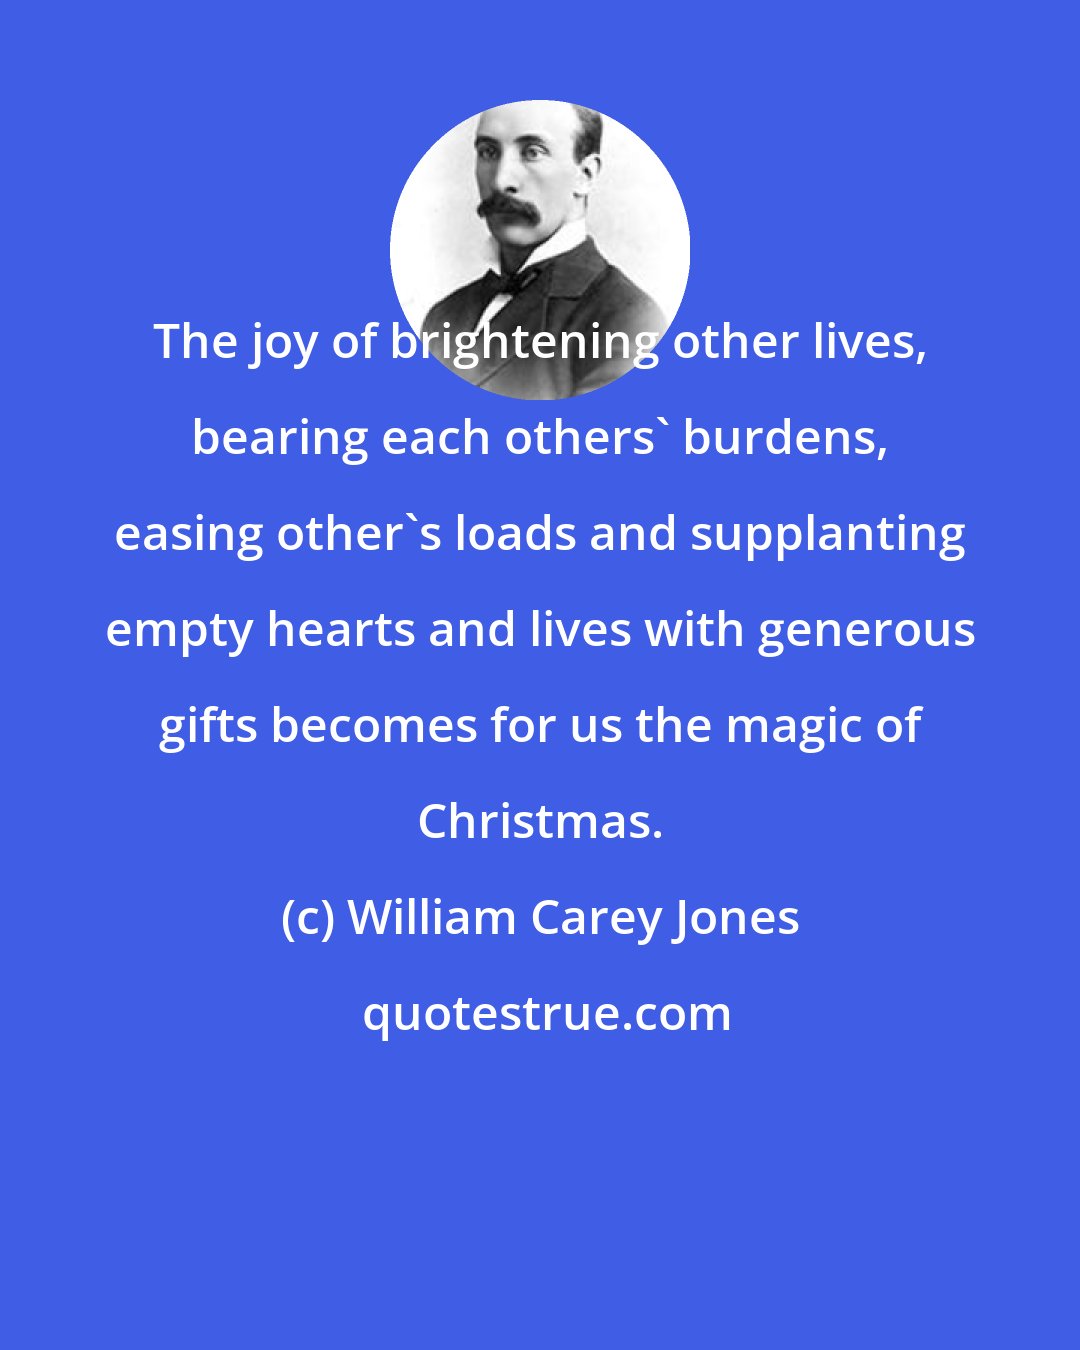 William Carey Jones: The joy of brightening other lives, bearing each others' burdens, easing other's loads and supplanting empty hearts and lives with generous gifts becomes for us the magic of Christmas.